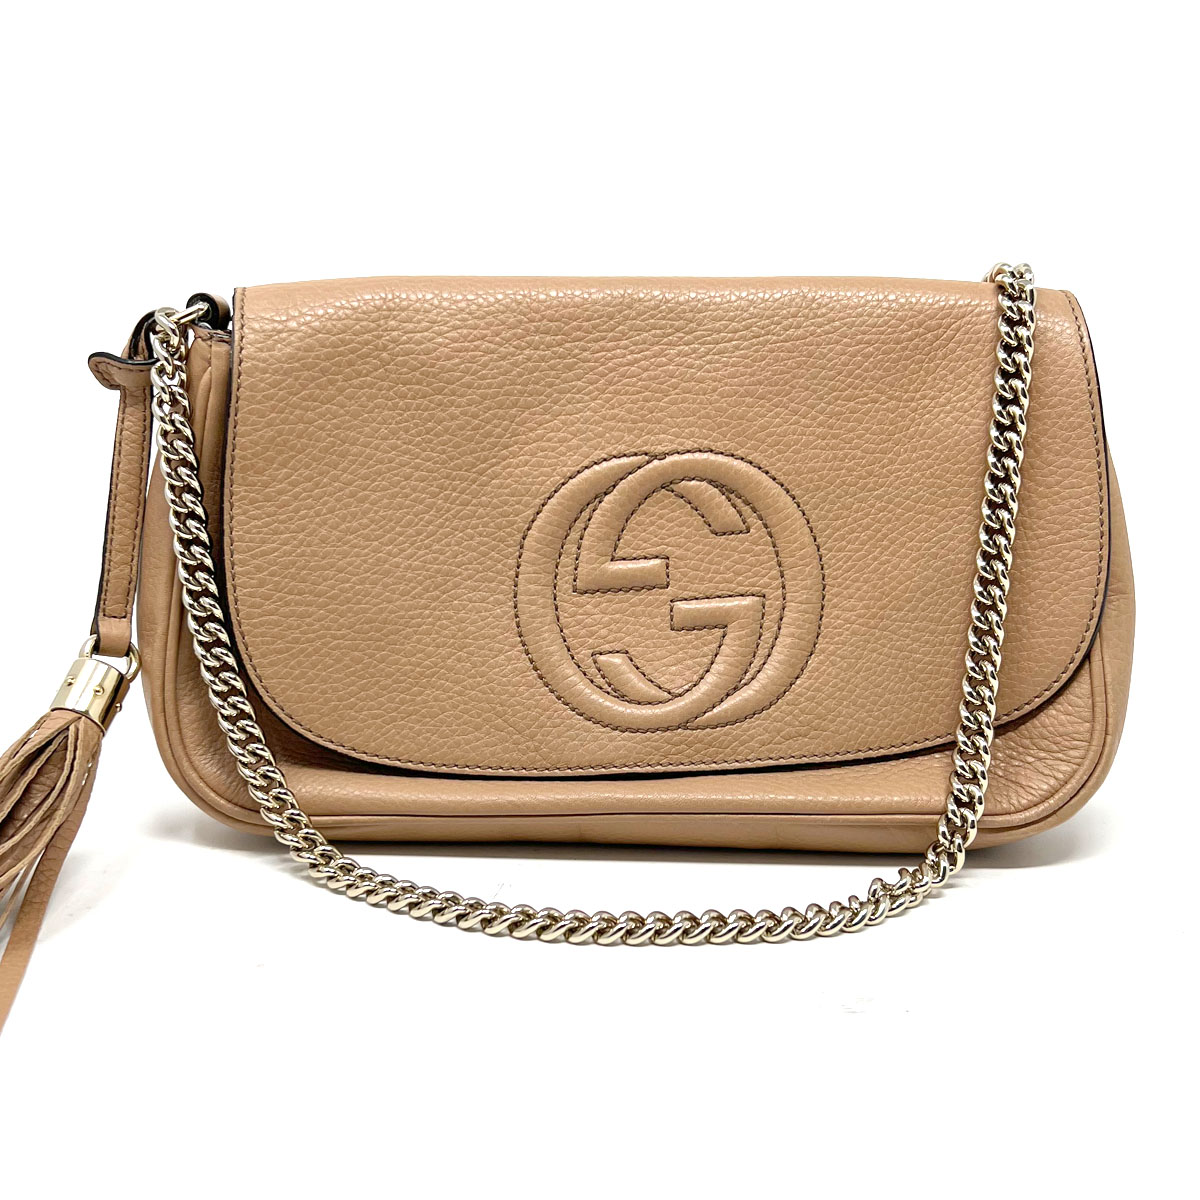 Soho long flap leather crossbody bag Gucci Beige in Leather - 27462984